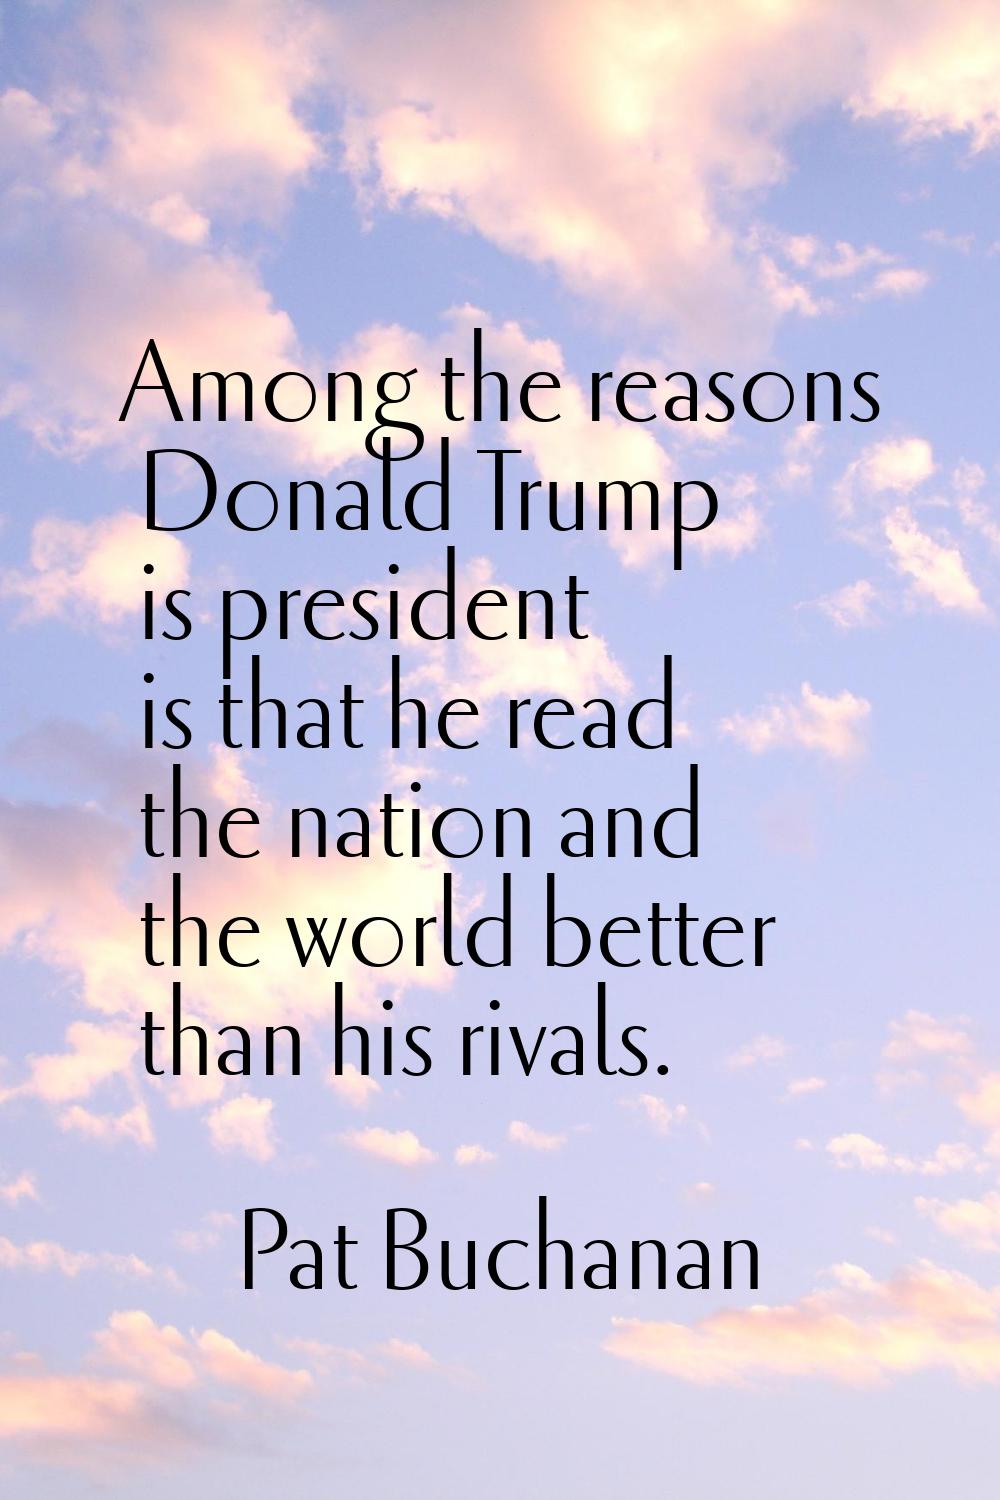 Among the reasons Donald Trump is president is that he read the nation and the world better than hi